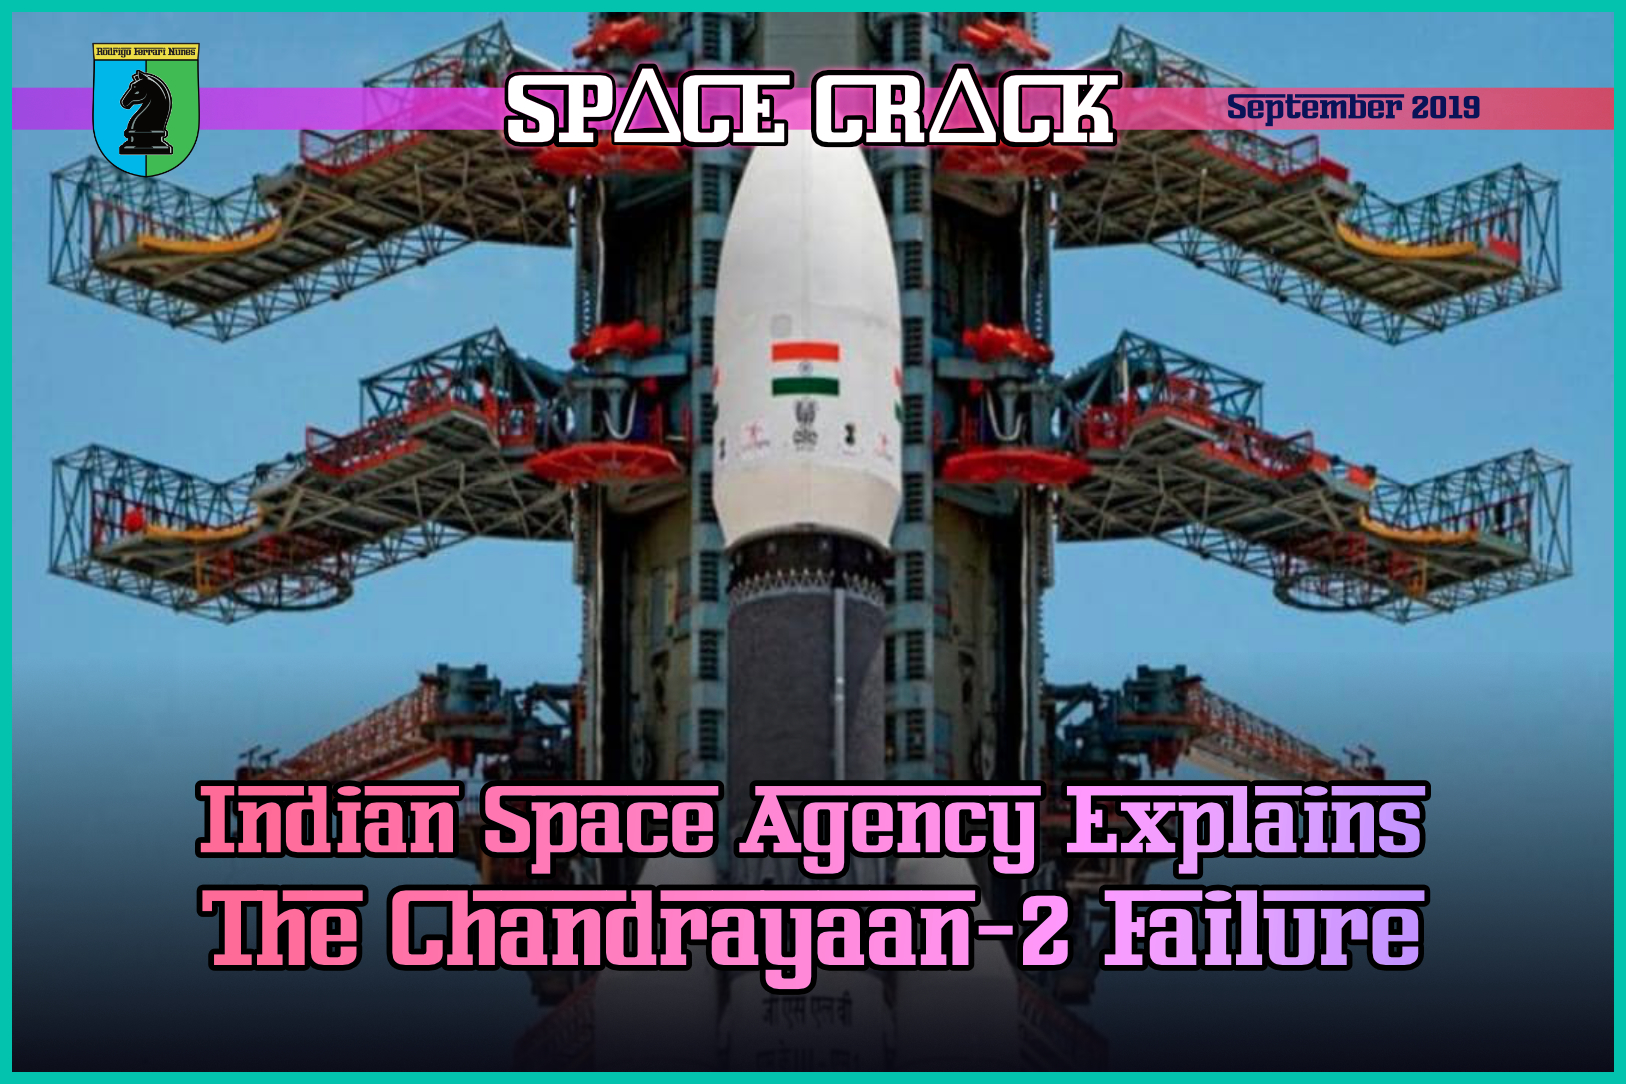 INDIAN SPACE AGENCY EXPLAINS THE CHANDRAYAAN-2 FAILURE